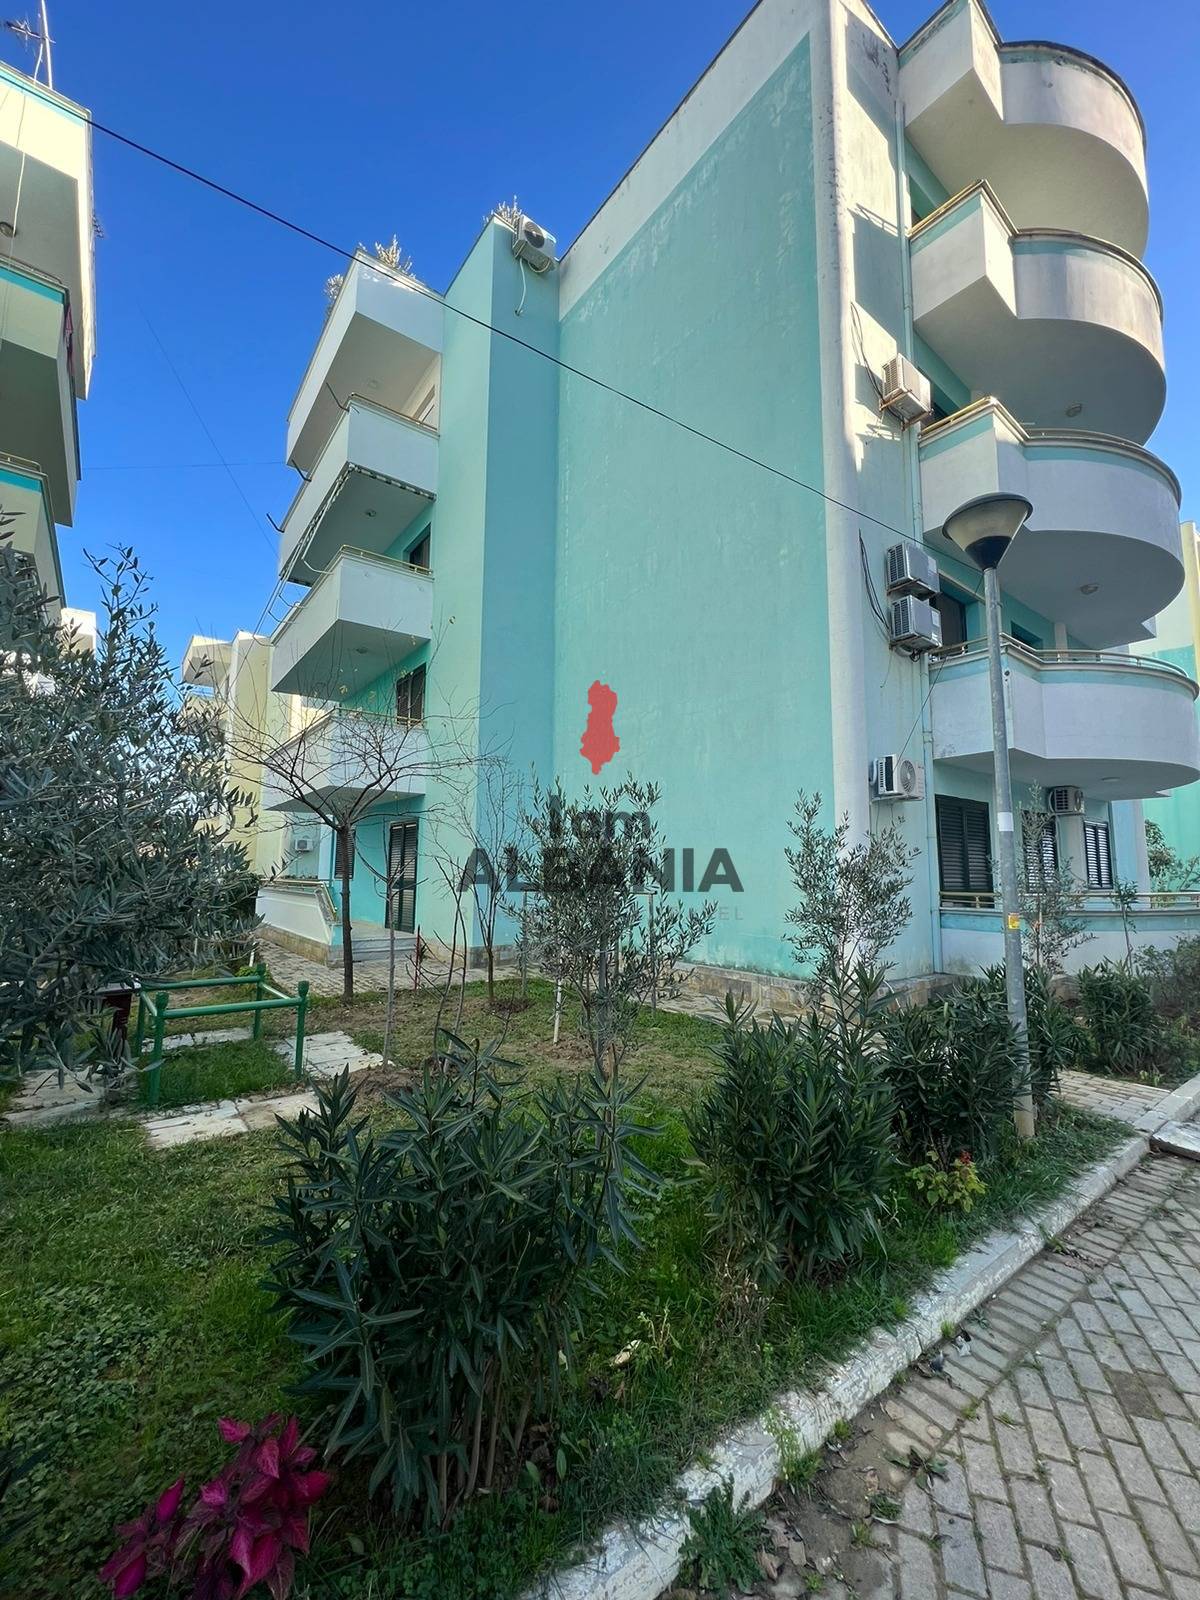 2-room apartment on the ground floor, parking in the complex